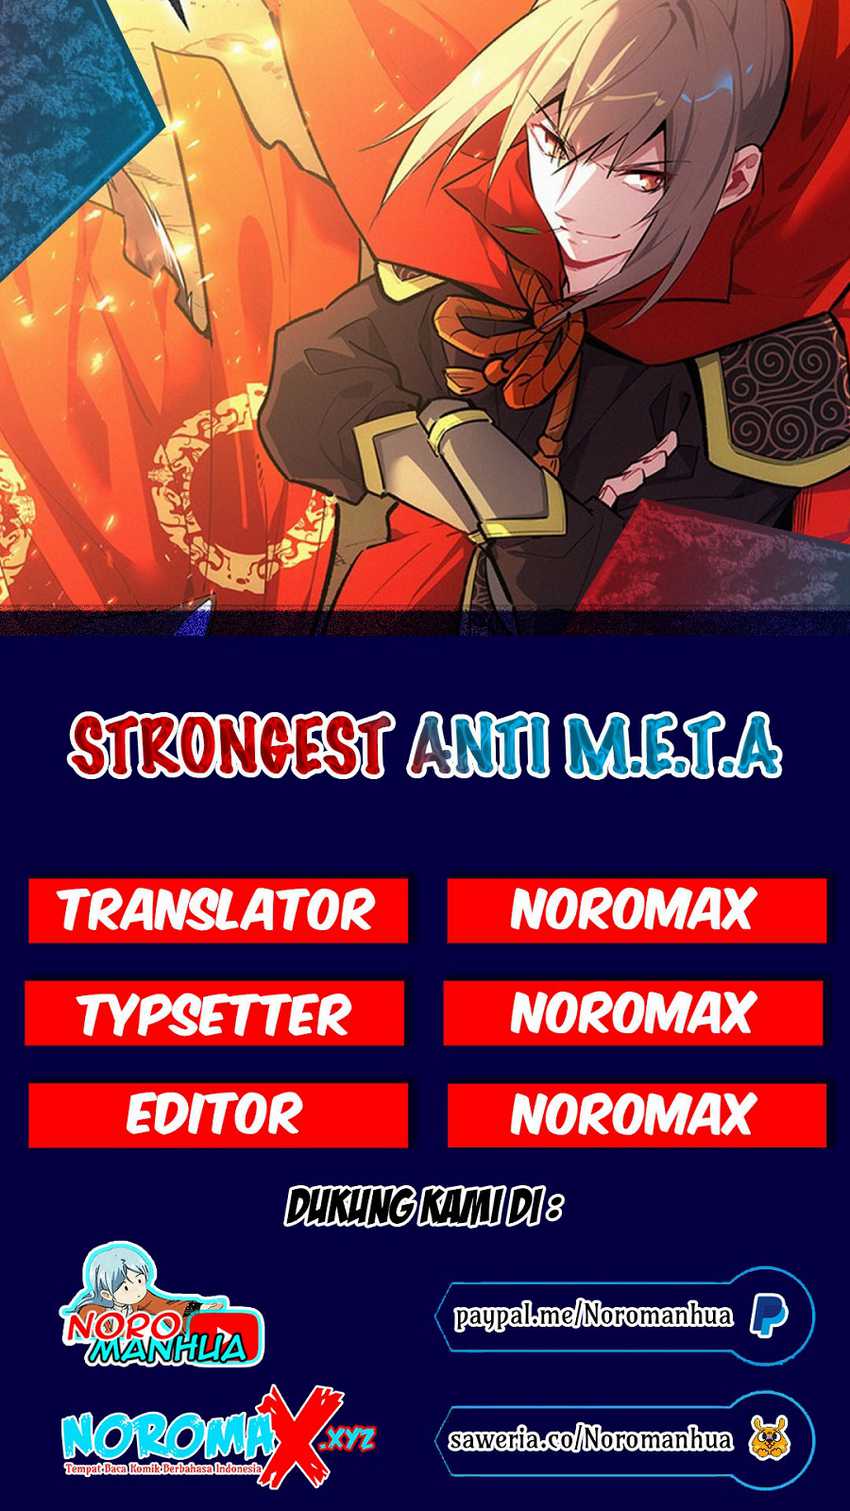 Strongest Anti M.E.T.A. Chapter 522